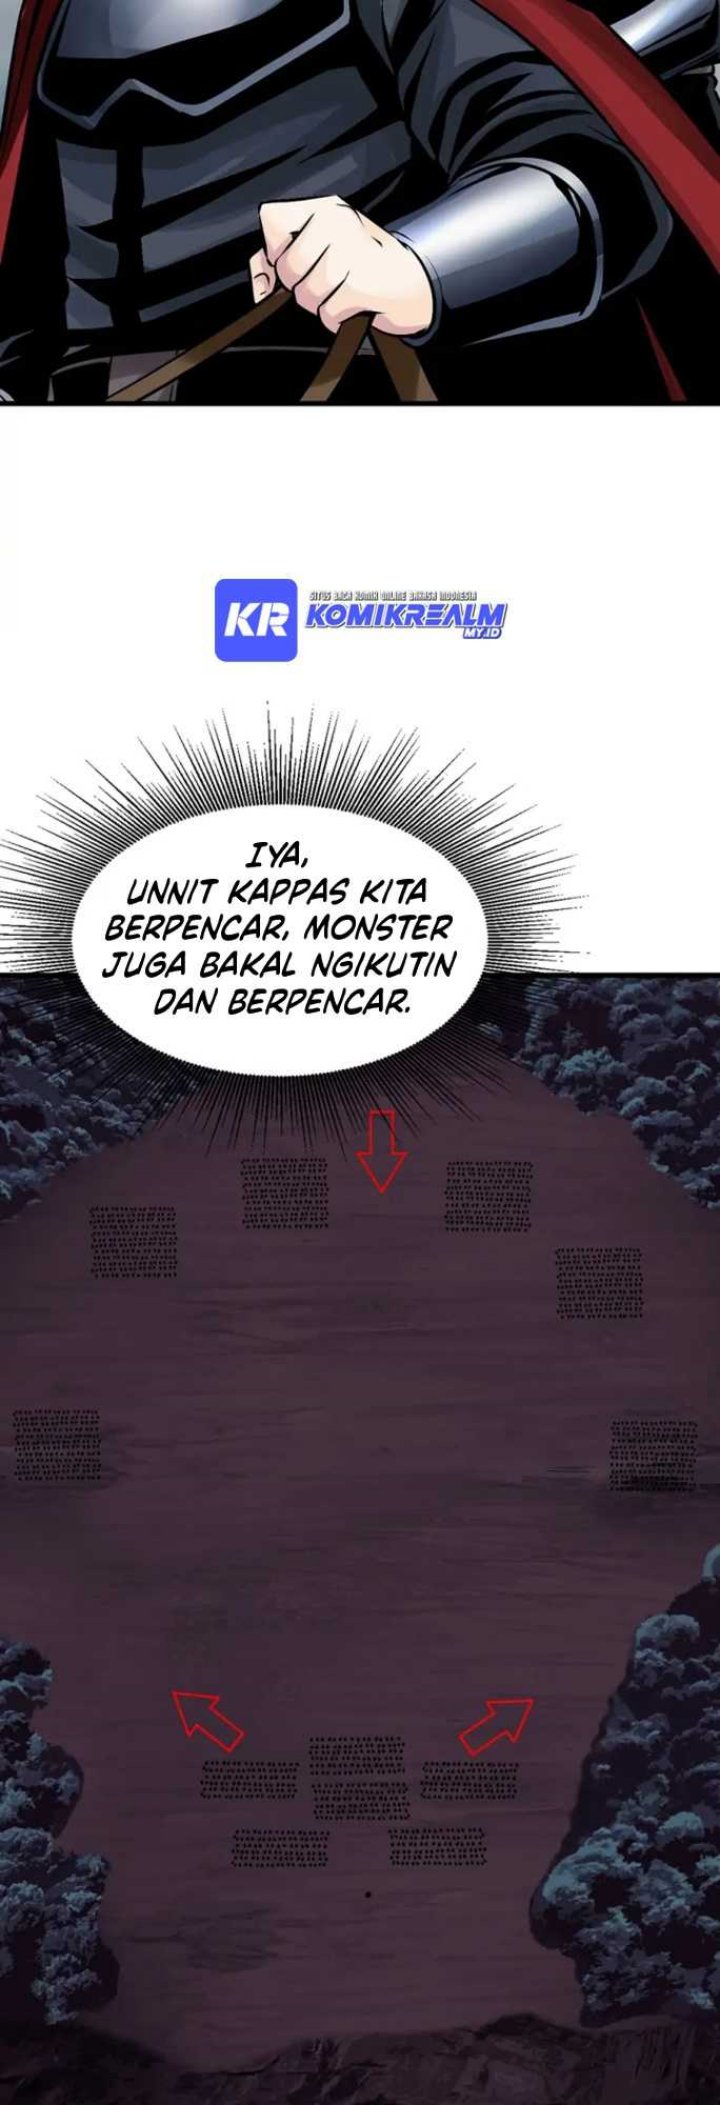 The Undefeated Ranker Chapter 51